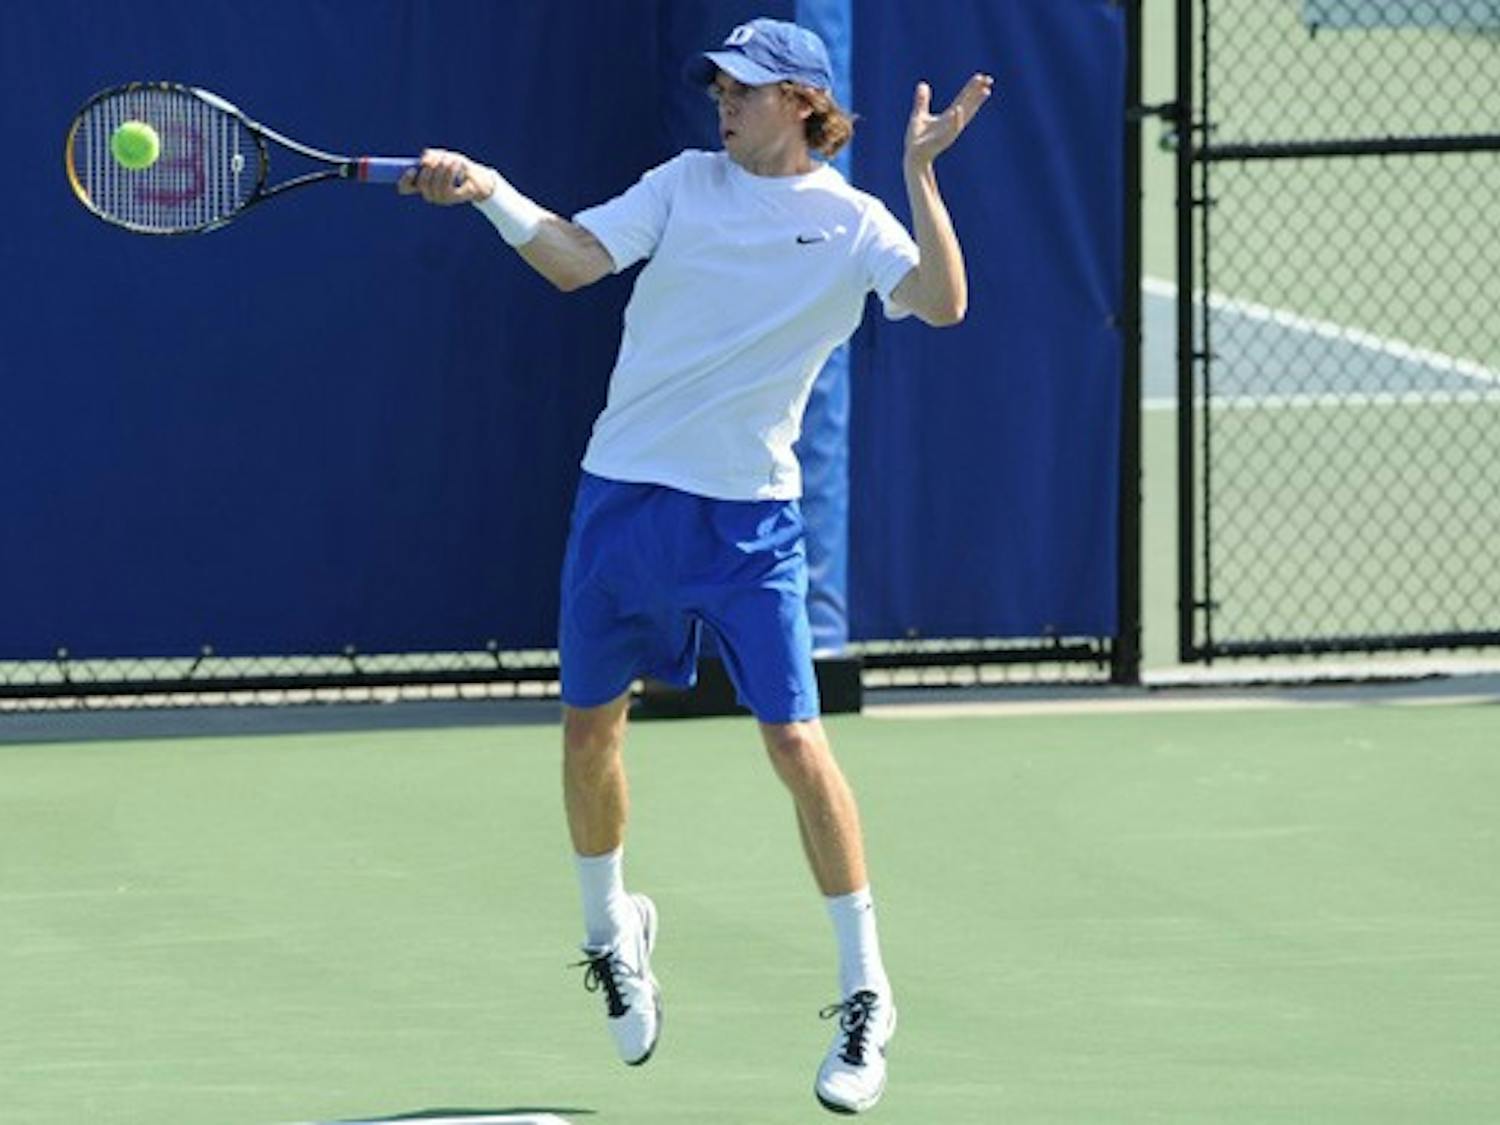 Reid Carleton won both of his matches against Miami Sunday—in singles, he won 6-4, 6-4 against Keith Crowley.